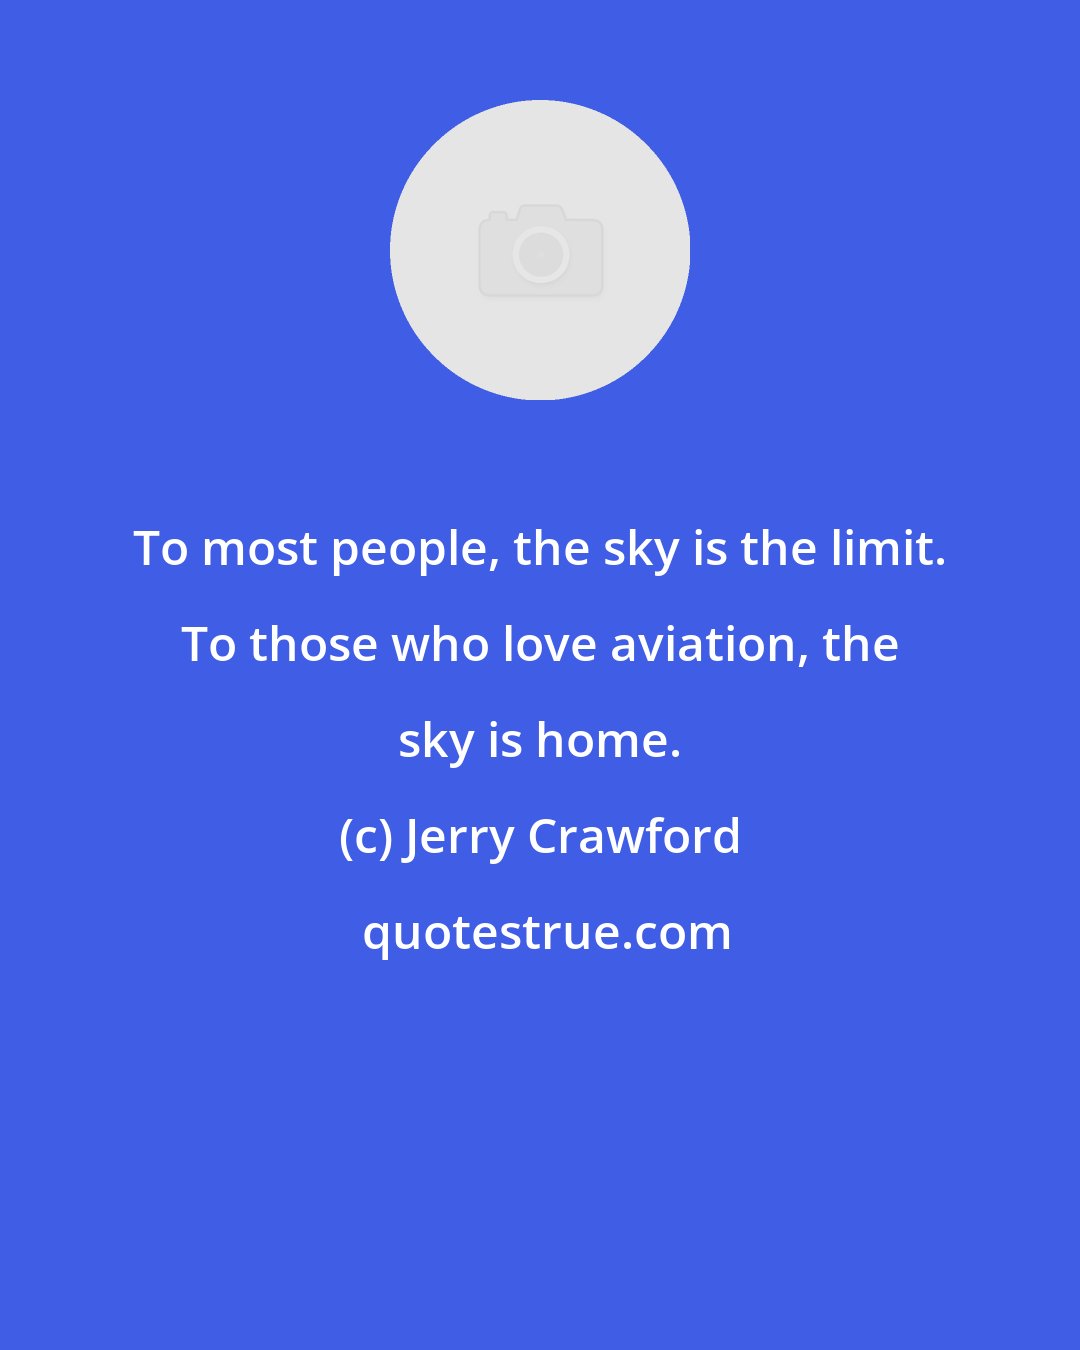 Jerry Crawford: To most people, the sky is the limit. To those who love aviation, the sky is home.